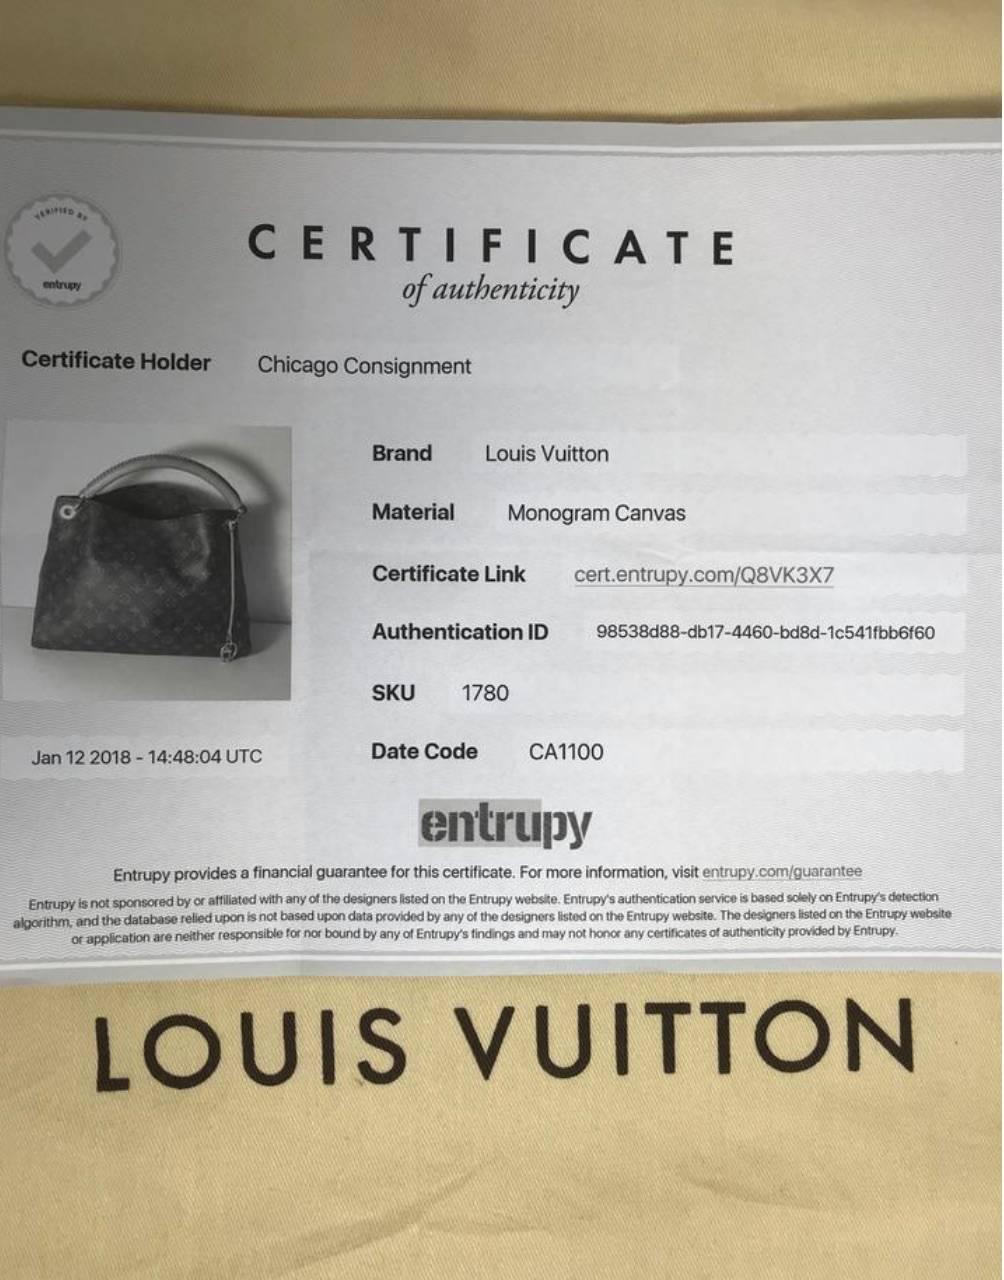 MODEL - Louis Vuitton Monogram Artsy MM

CONDITION - Very Good.  Light to medium vachette free of watermarks. Very light darkening on the underside of braided strap.  Bright and shiny hardware.  Piece maintains original shape without creases or